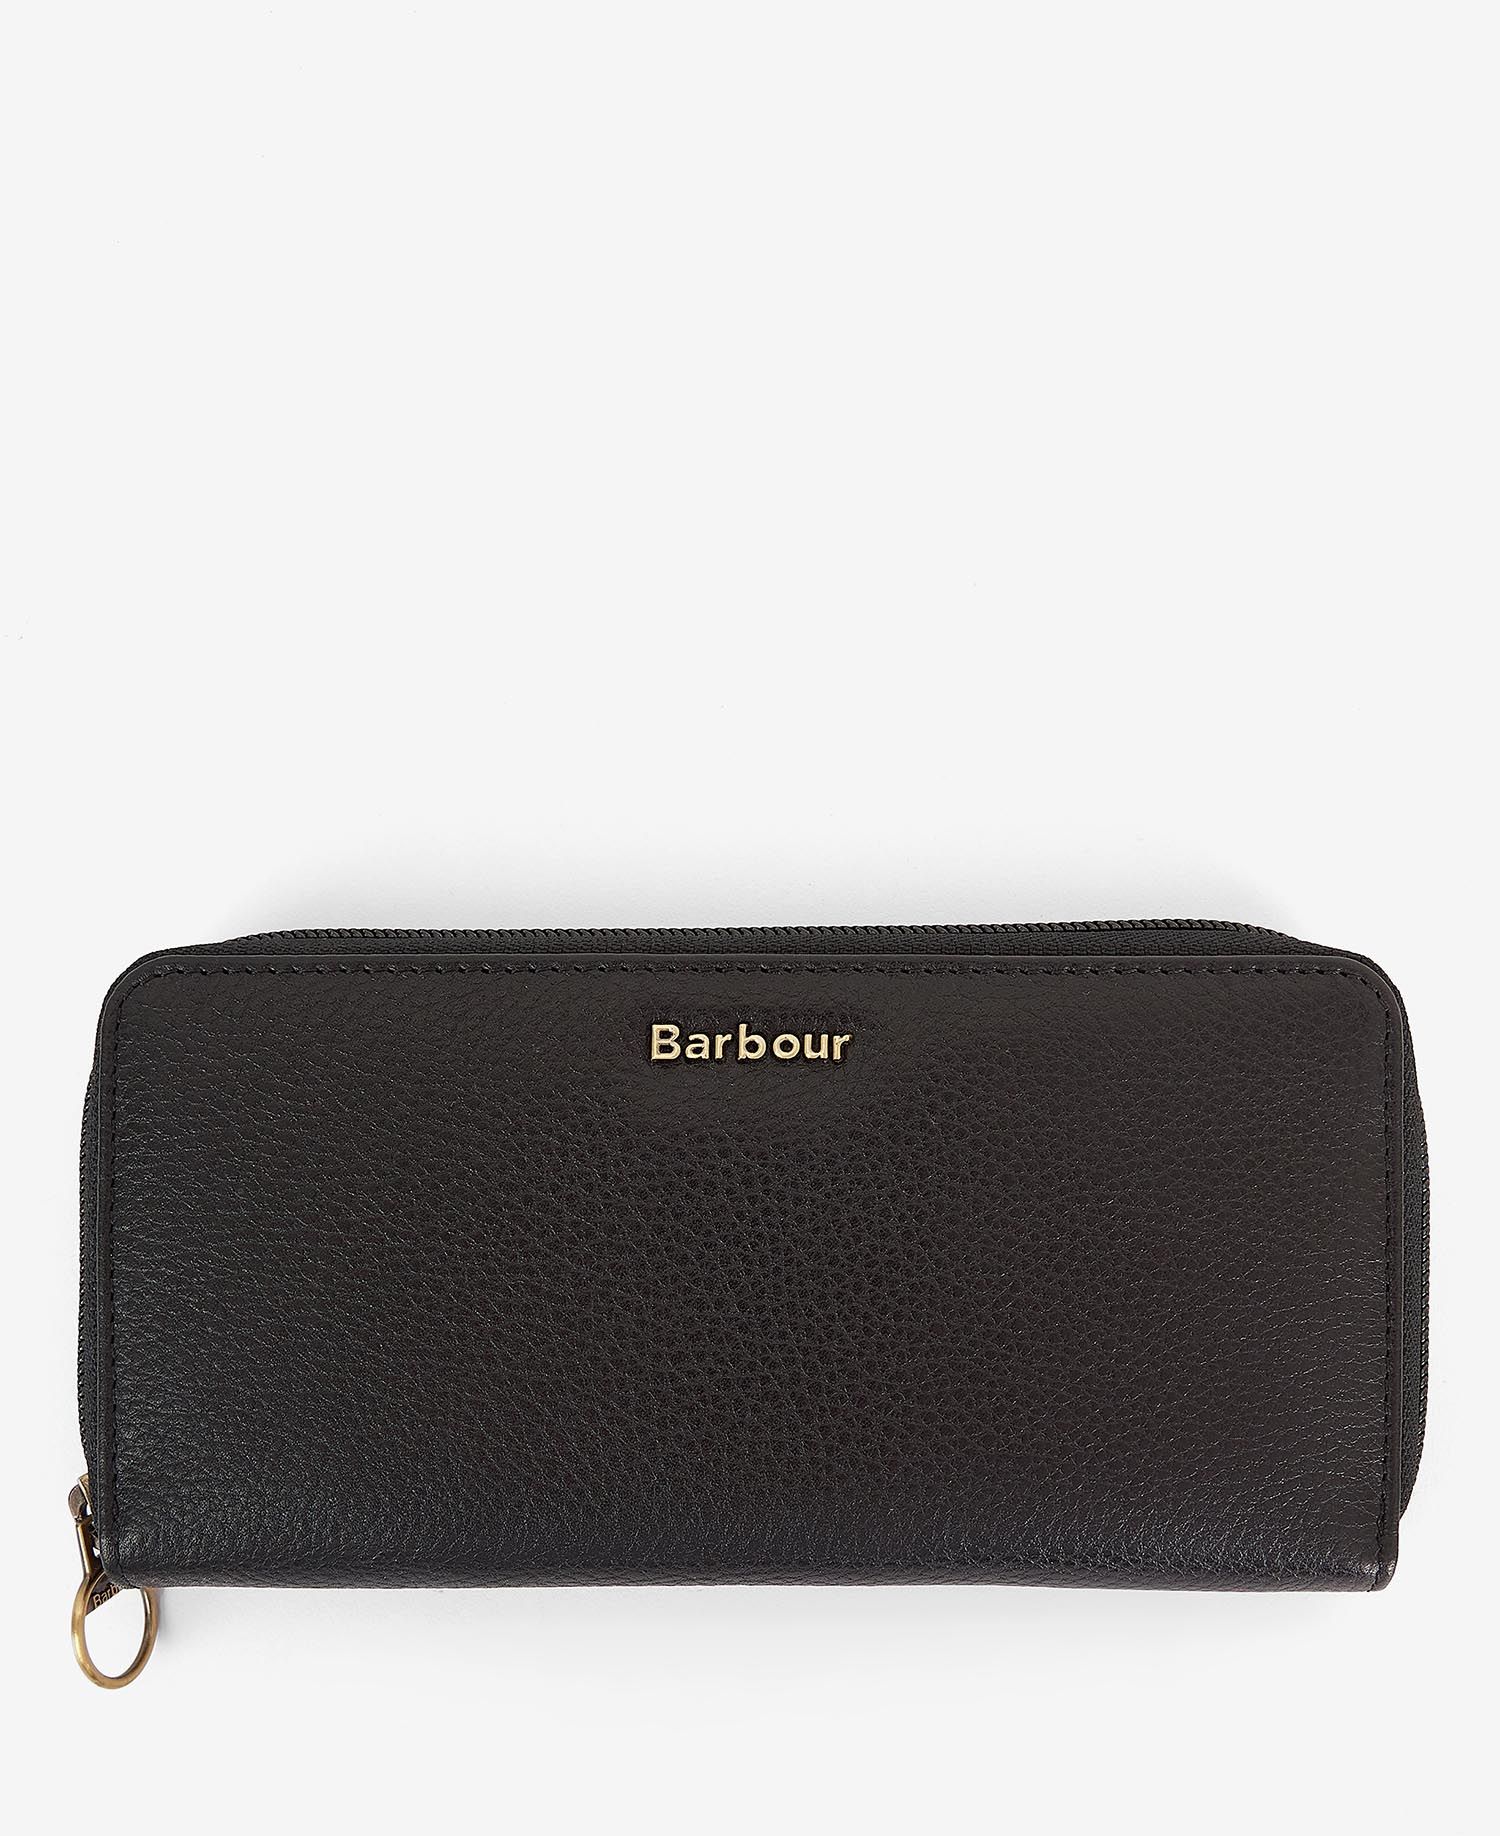 Barbour Laire Matinee Purse